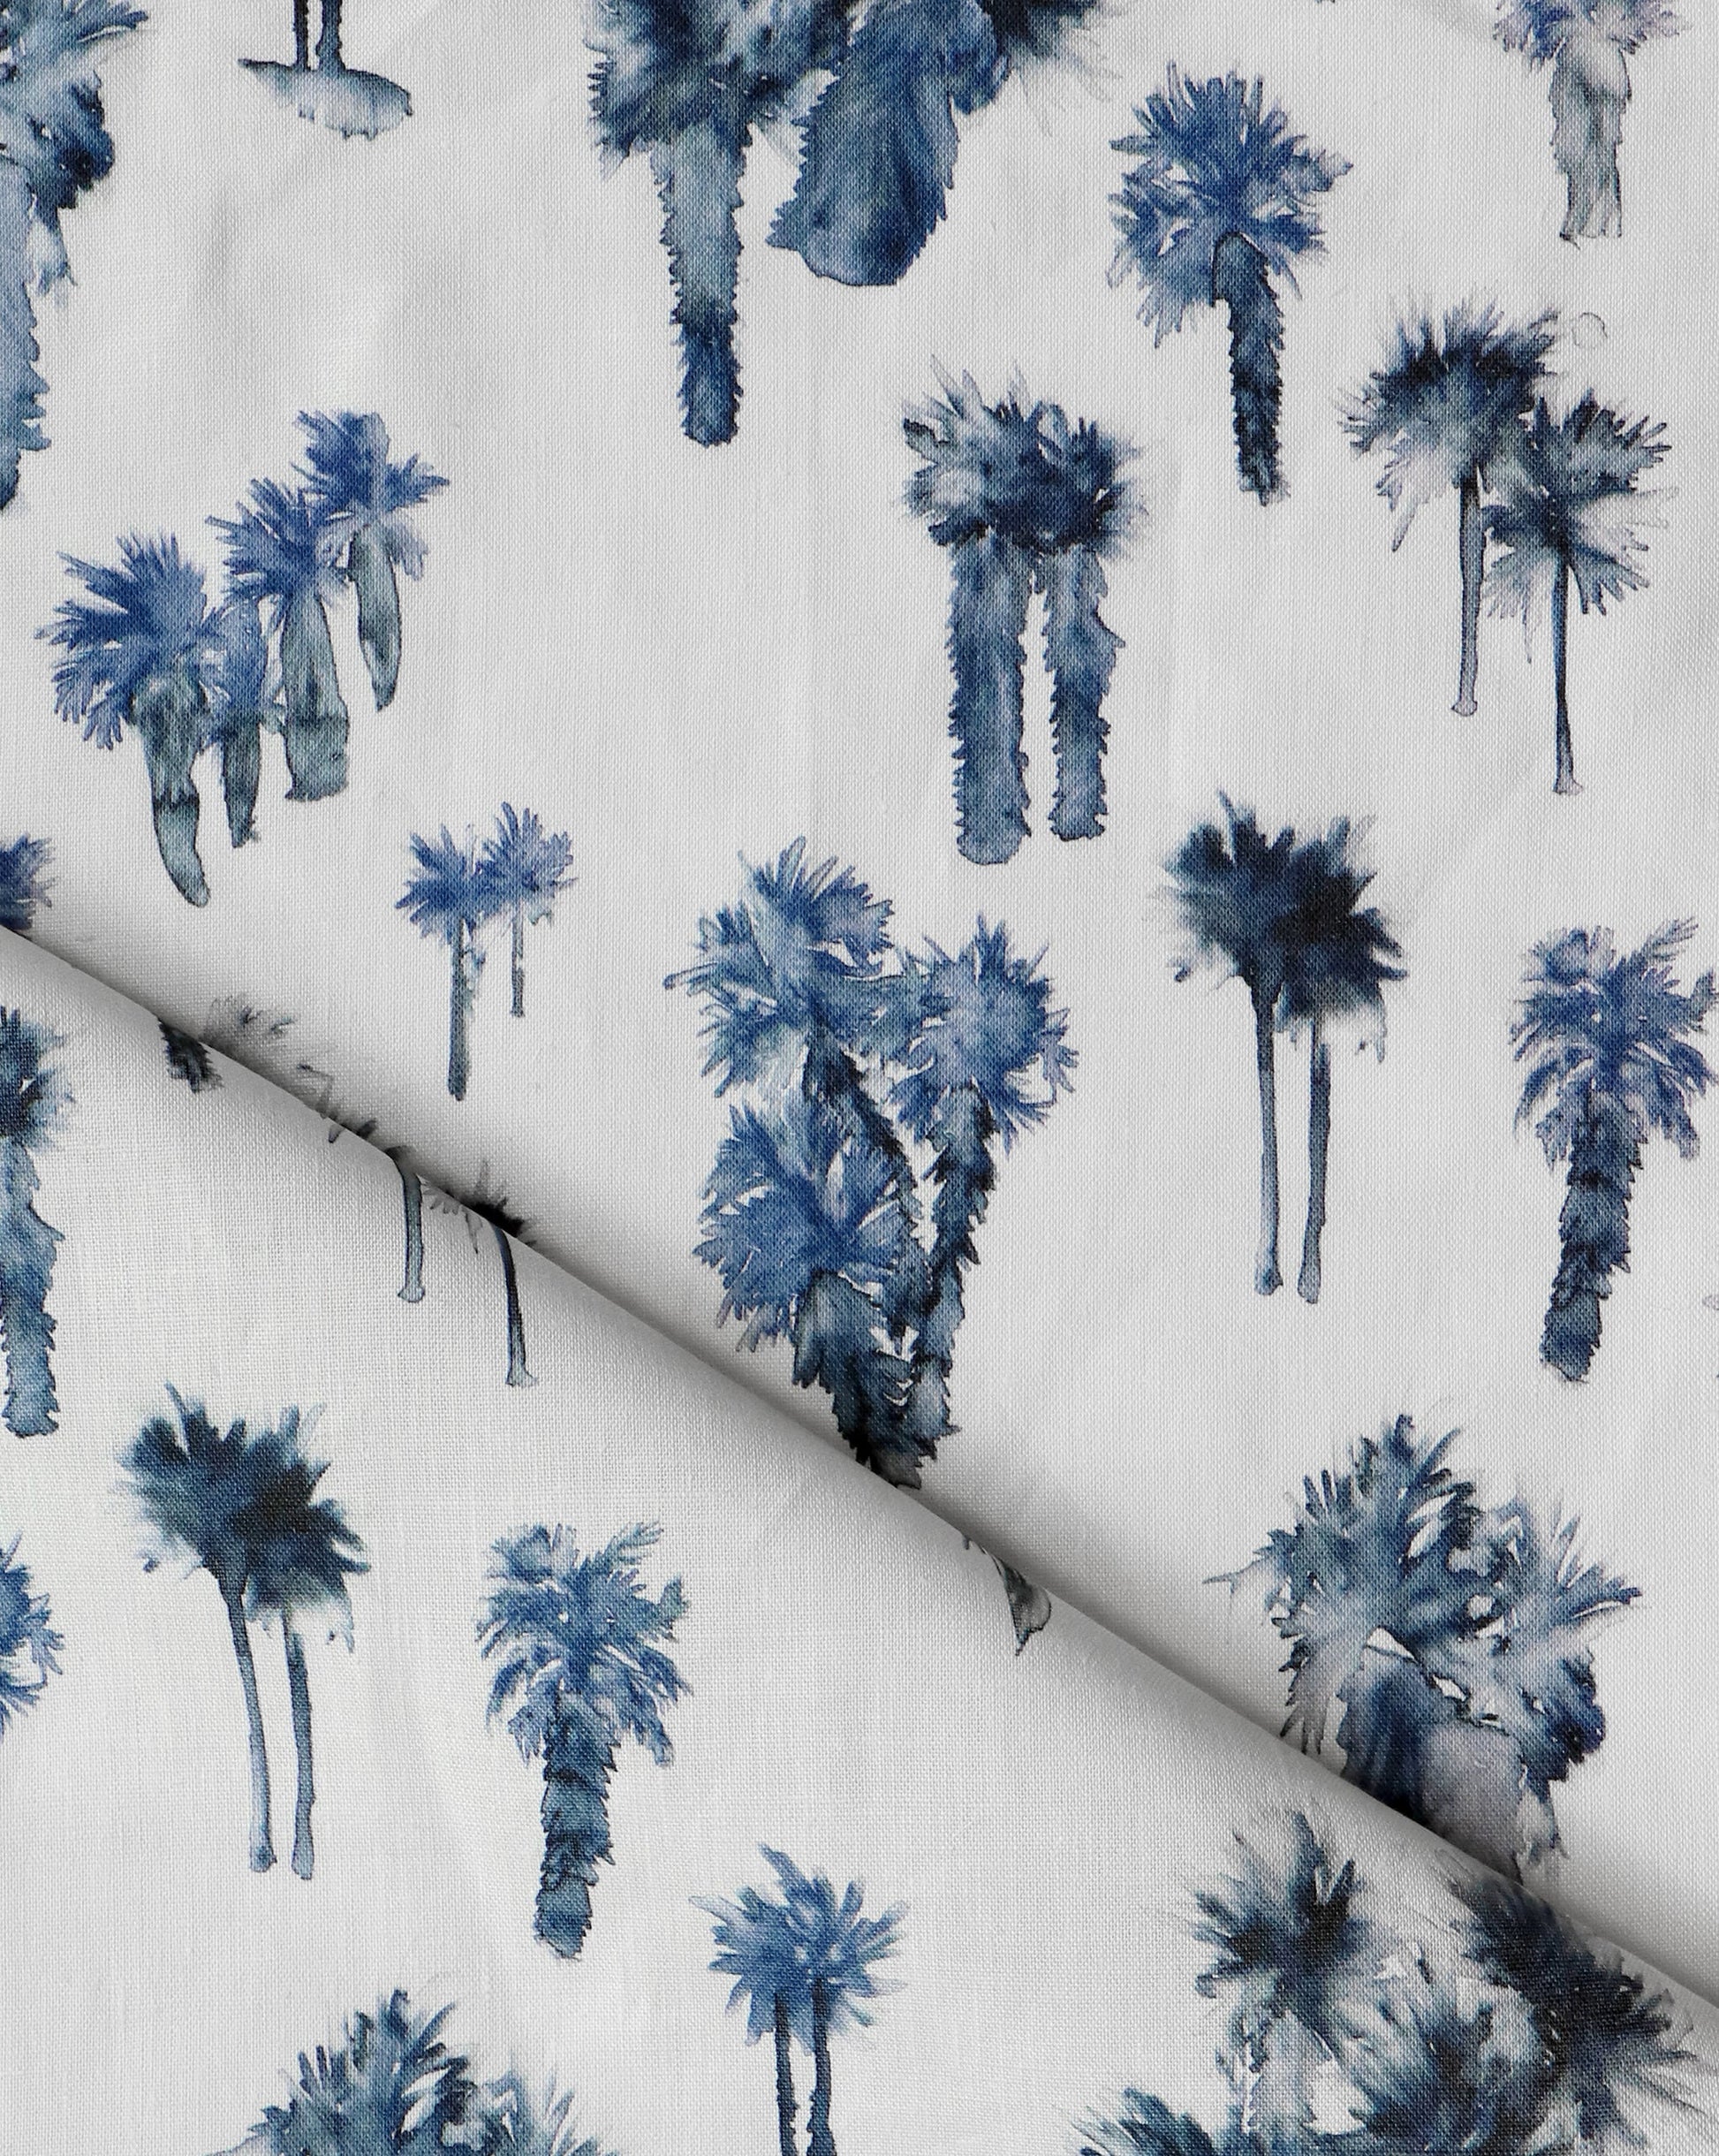 A luxurious Perfect Palm Fabric Midnight featuring palm trees in a watercolor style